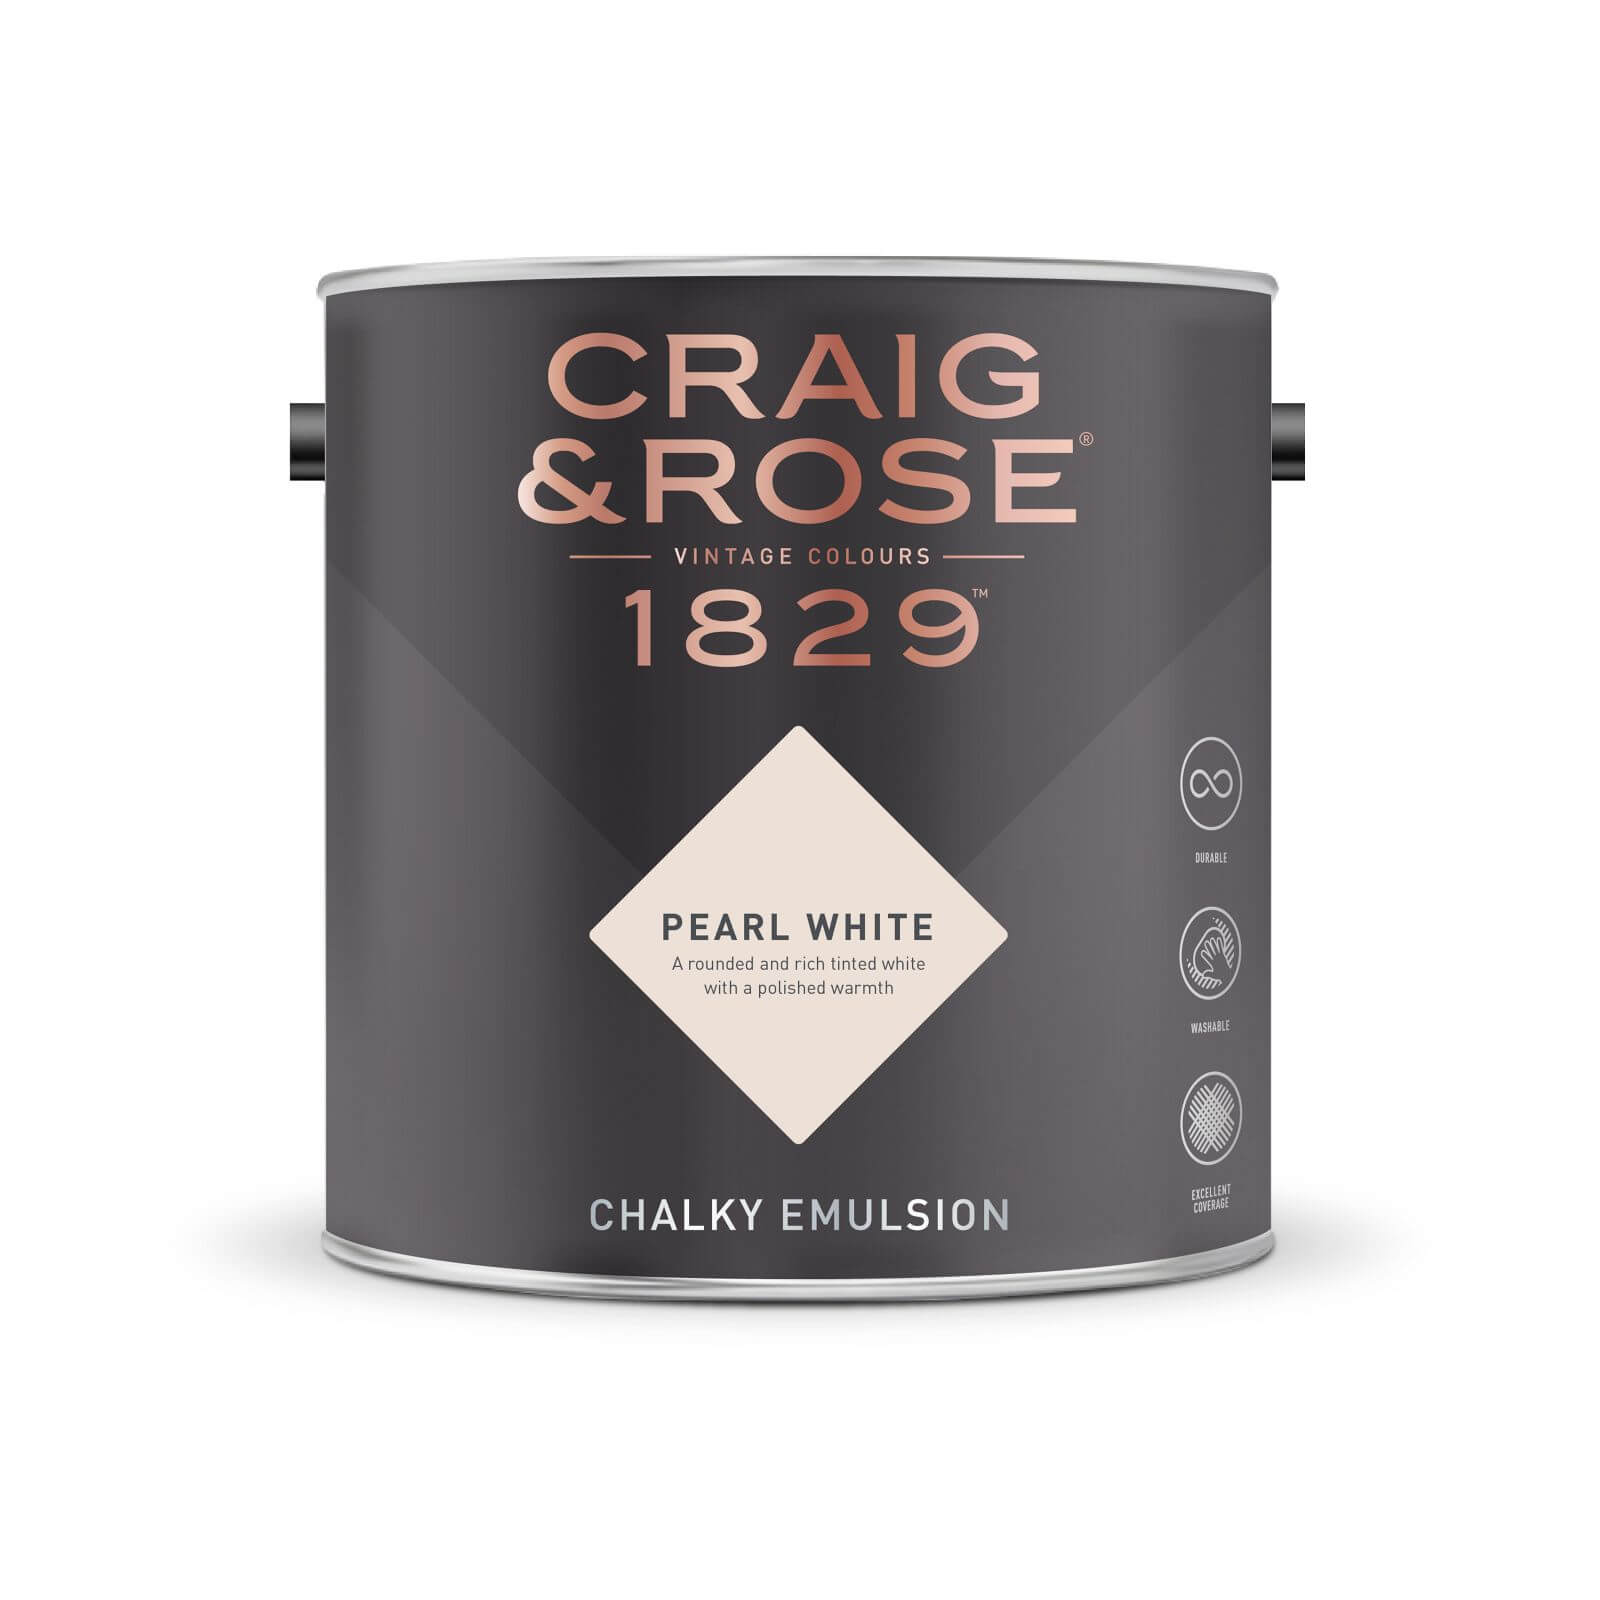 Craig & Rose 1829 Chalky Emulsion Paint Pearl White - 5L